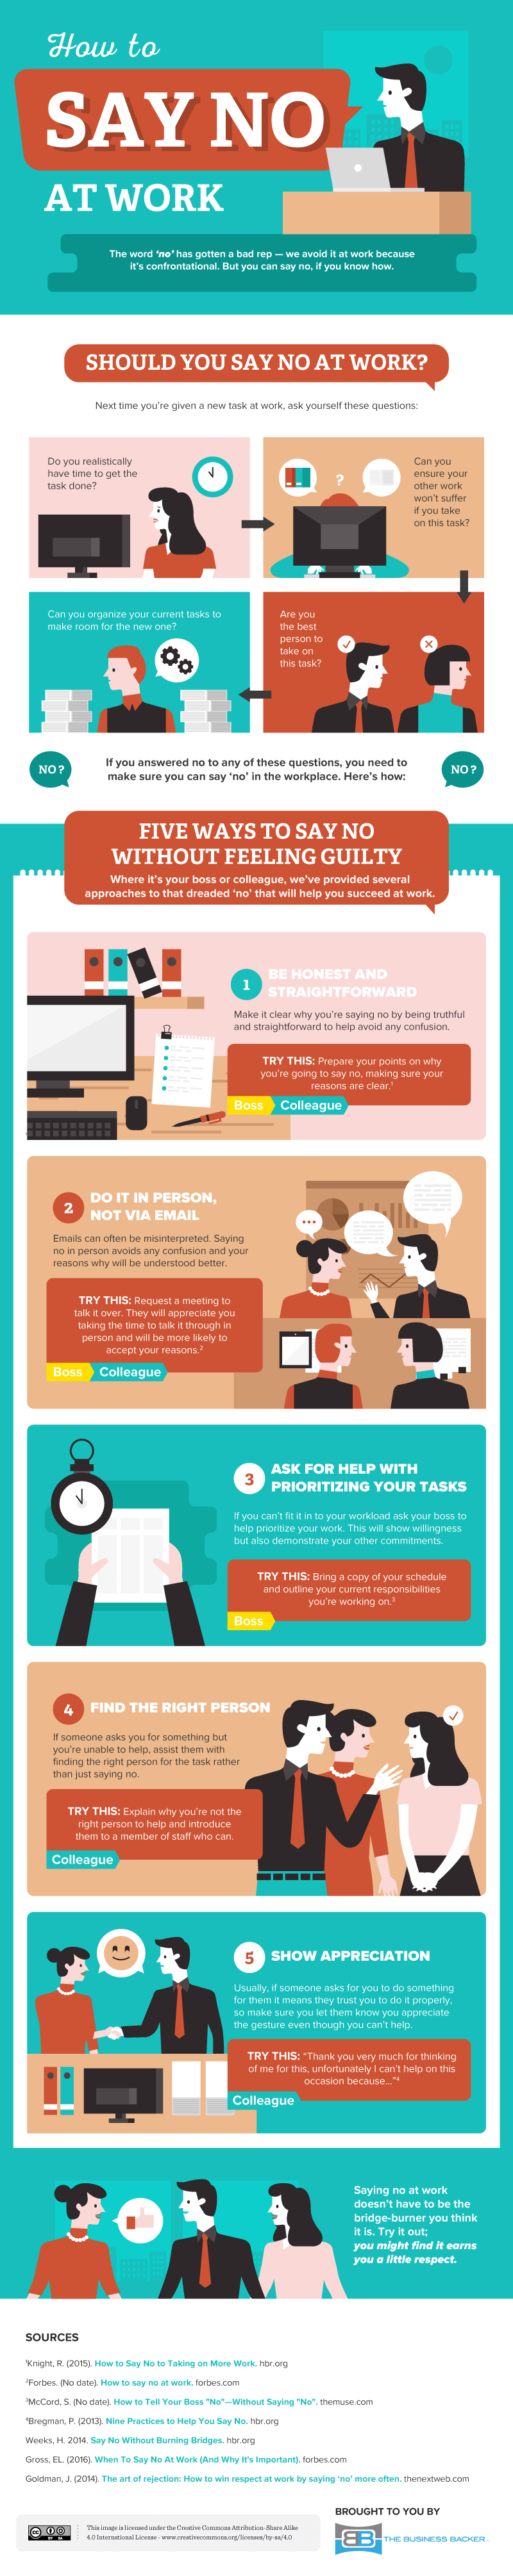 how to say no infographic